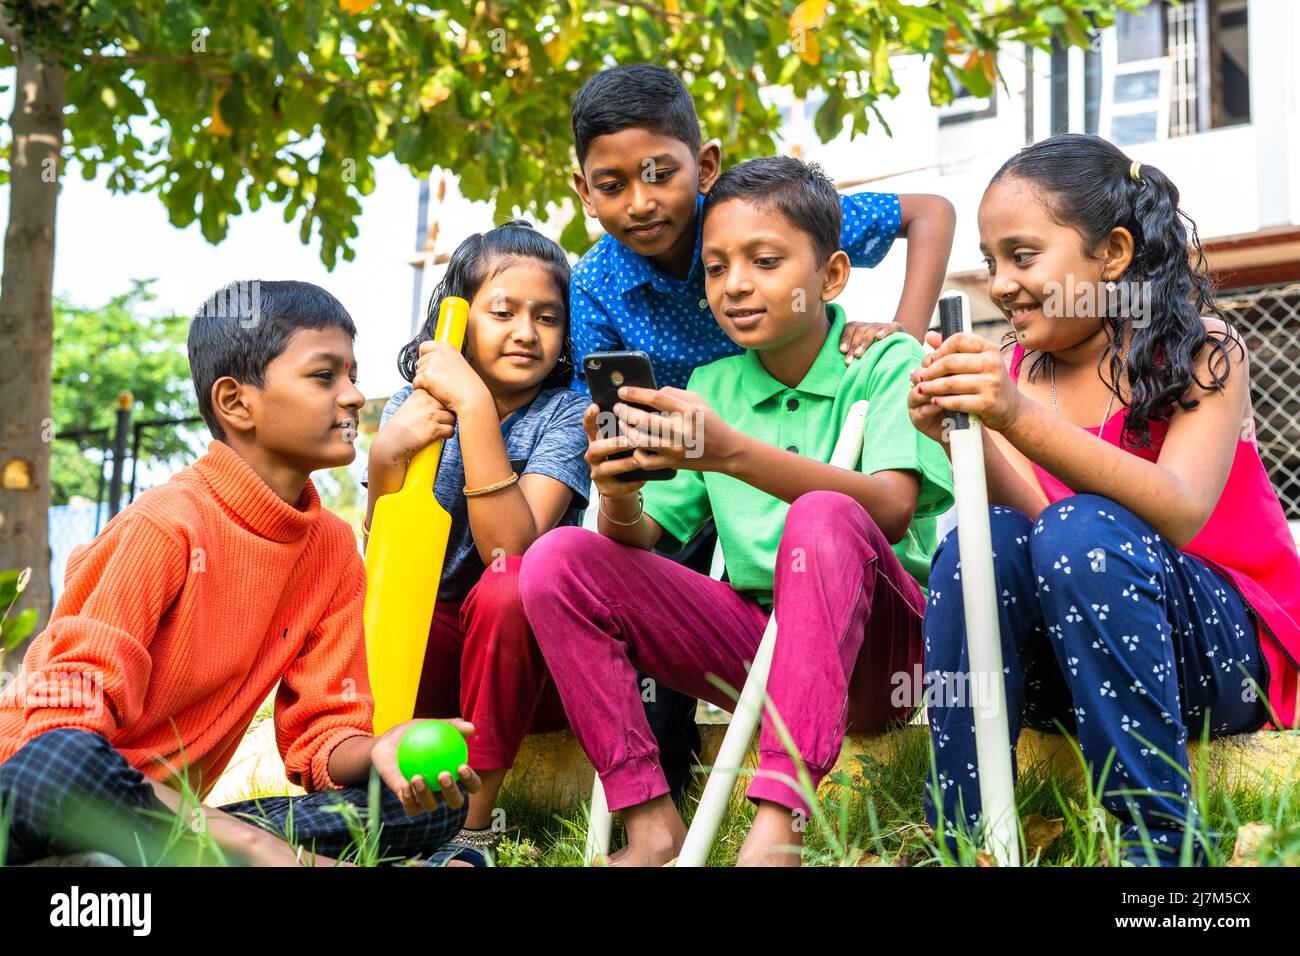 Teenage kid showing mobile phone to his friends at park after playing cricket - concept of technology, togetherness and communication Stock Photo